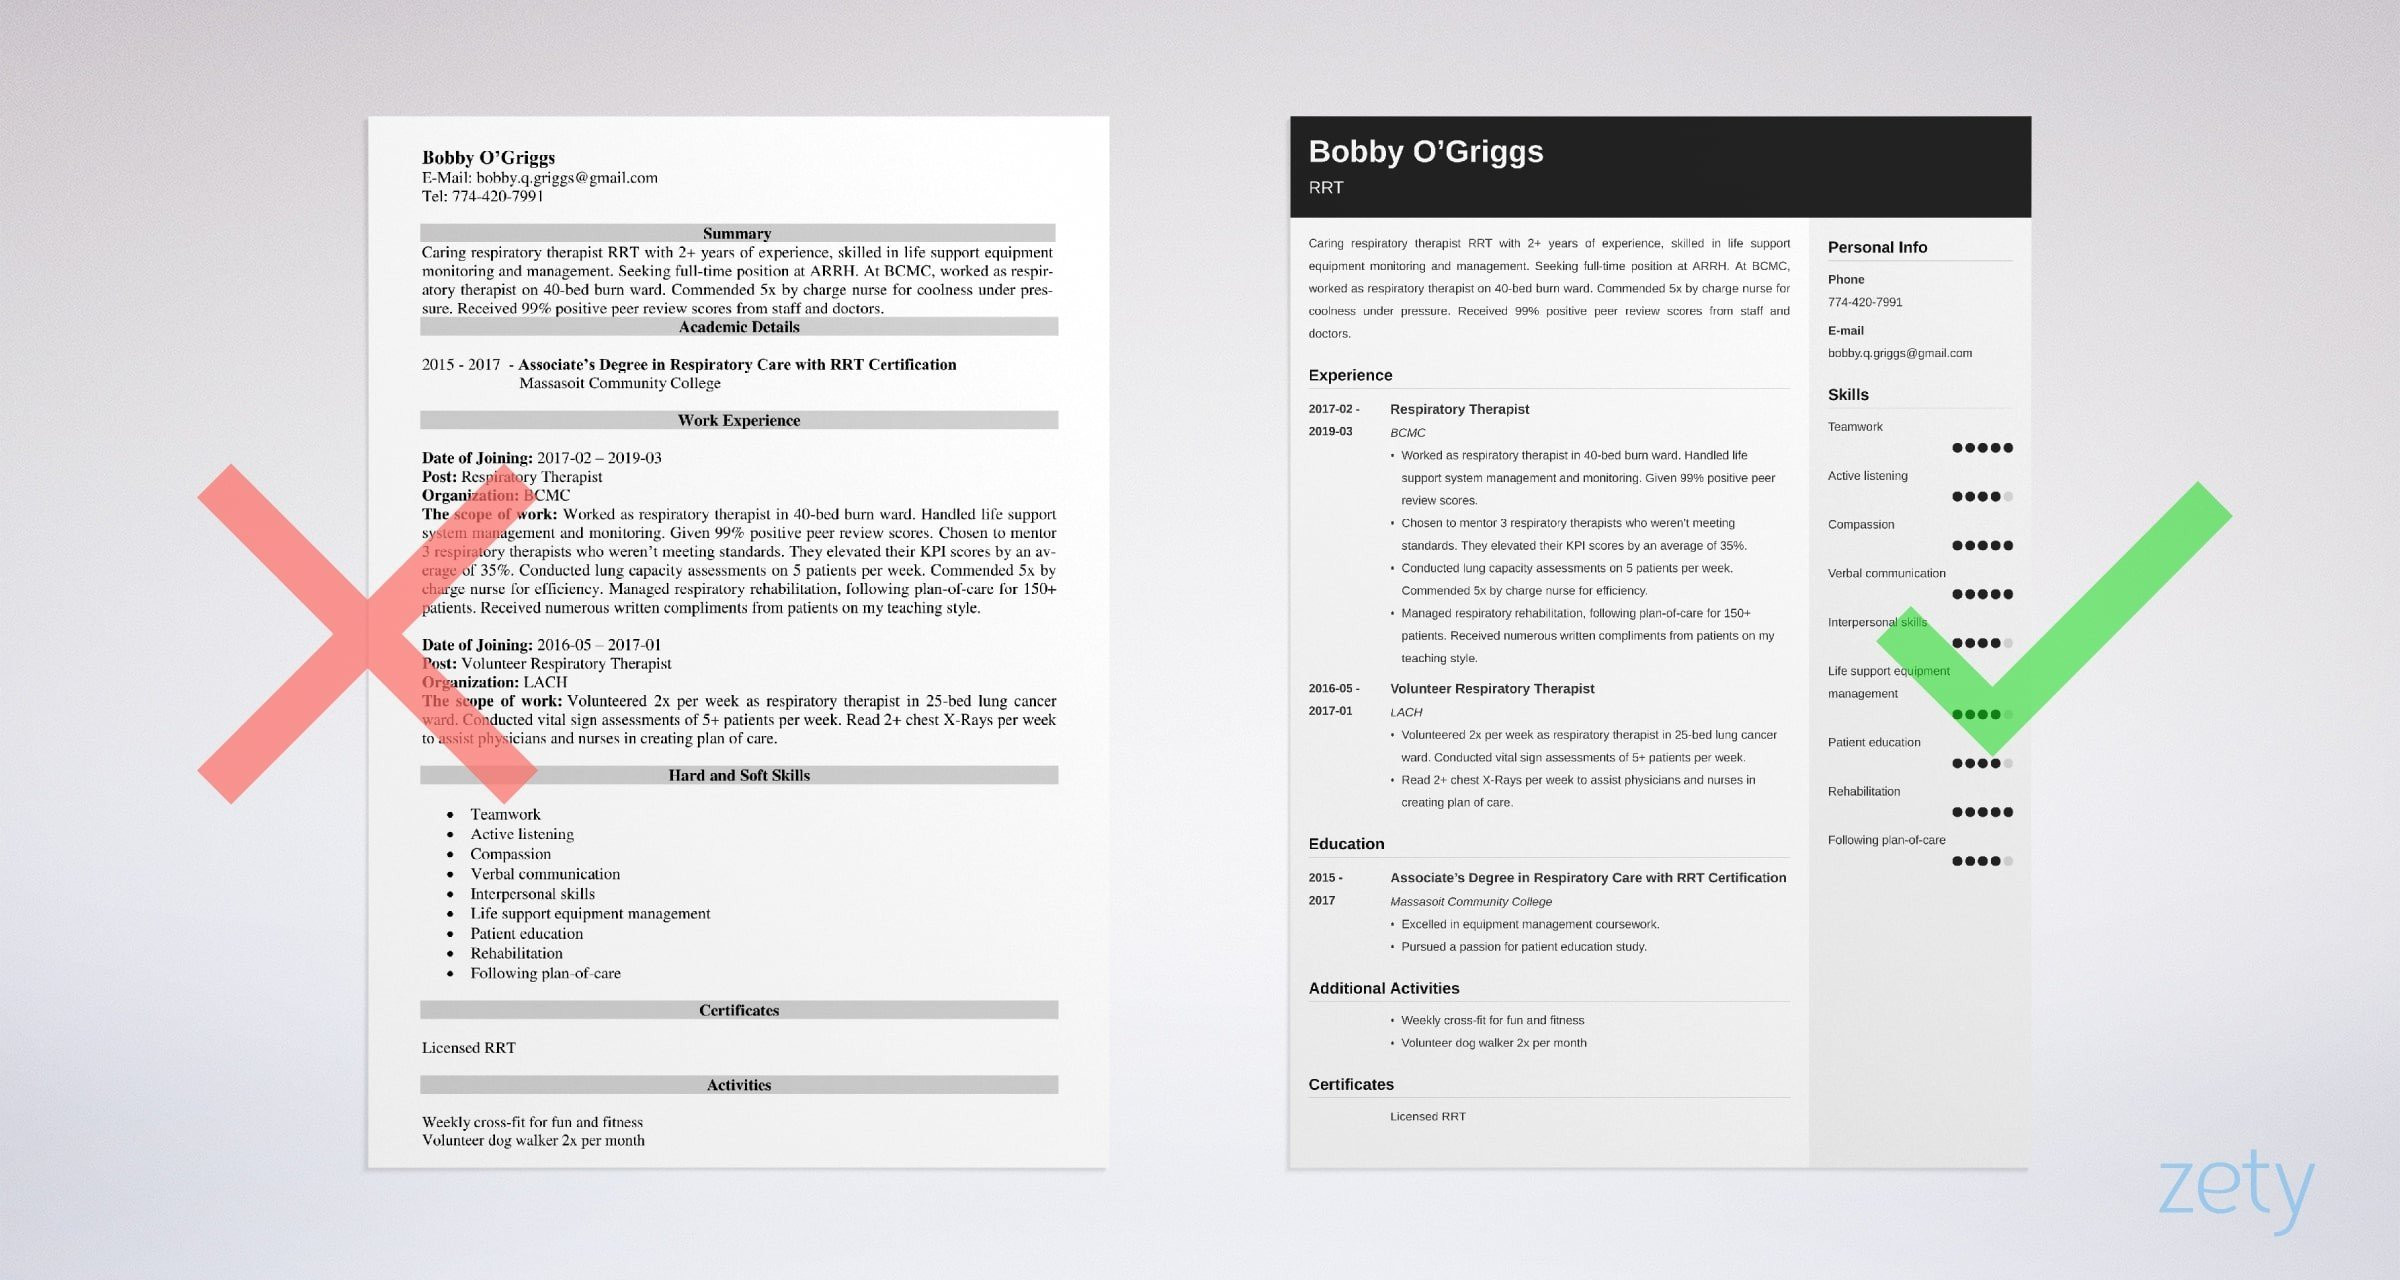 Sample Resume for Respiratory therapist Student Respiratory therapist Resume Sample [lancarrezekiqskills & Objective]